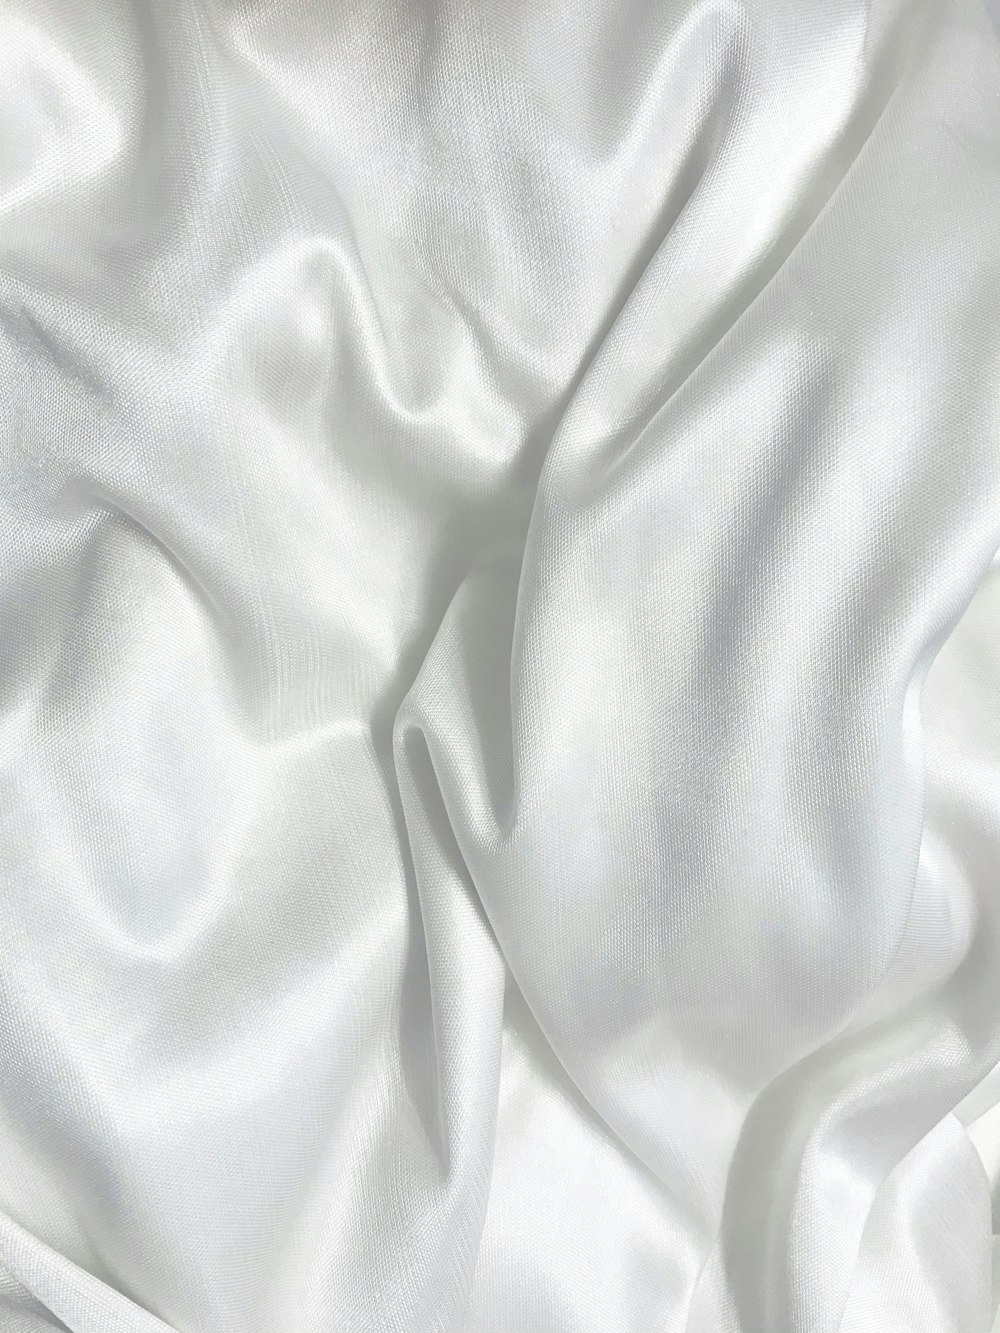 30k+ White Silk Pictures | Download Free Images on Unsplash